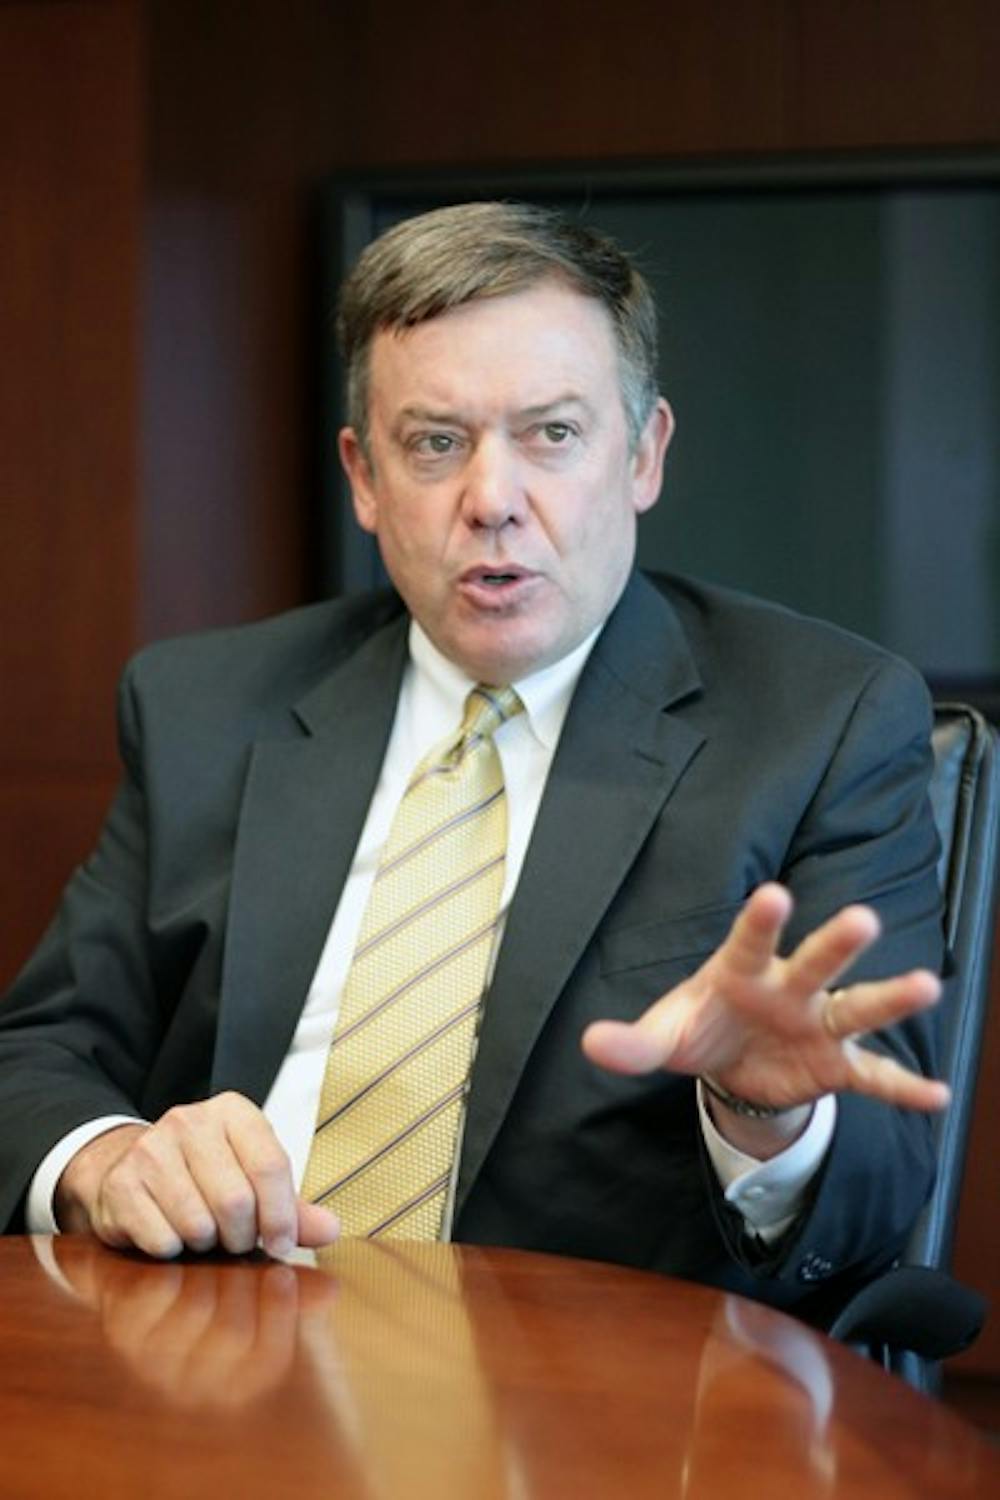 University President Michael Crow speaks to The State Press editorial board Oct. 11, 2011. President Crow recently released proposed tuition increase percentages. (Photo by Beth Easterbrook)